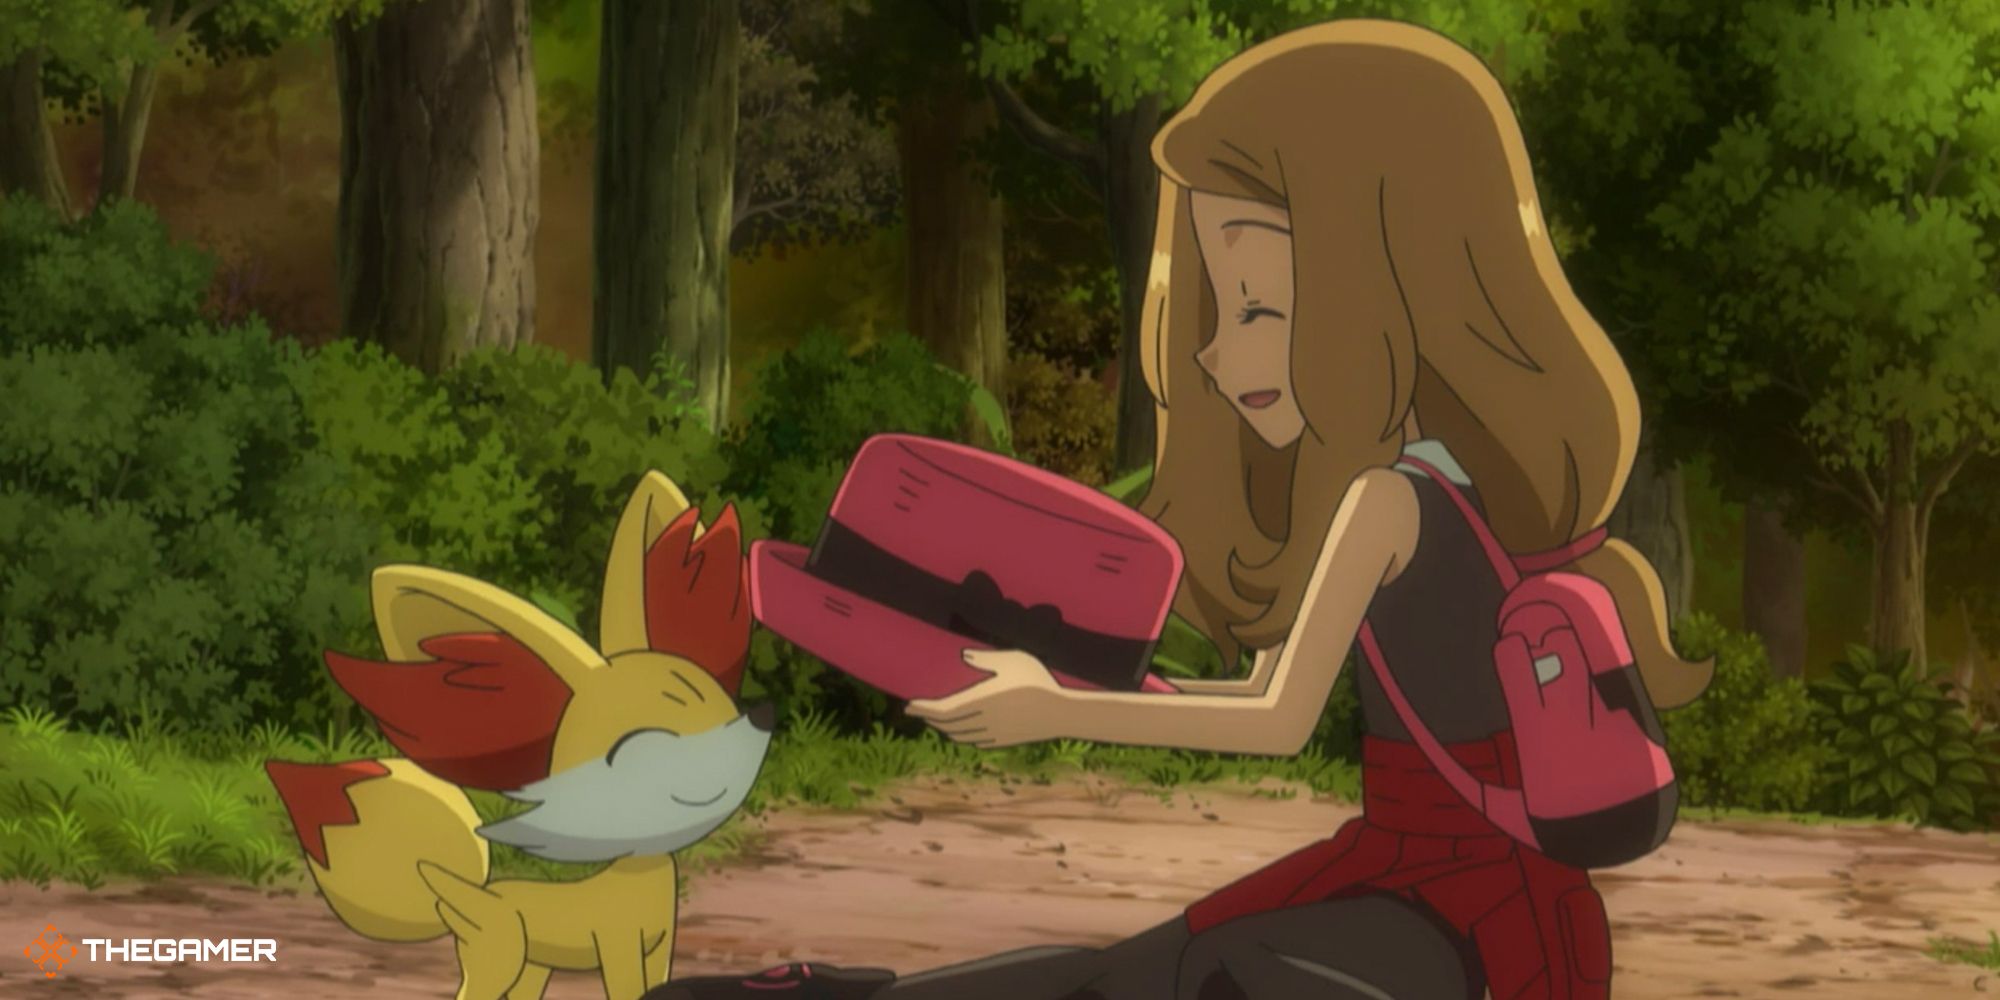 Serena holds her hat while laughing with her Fennekin.